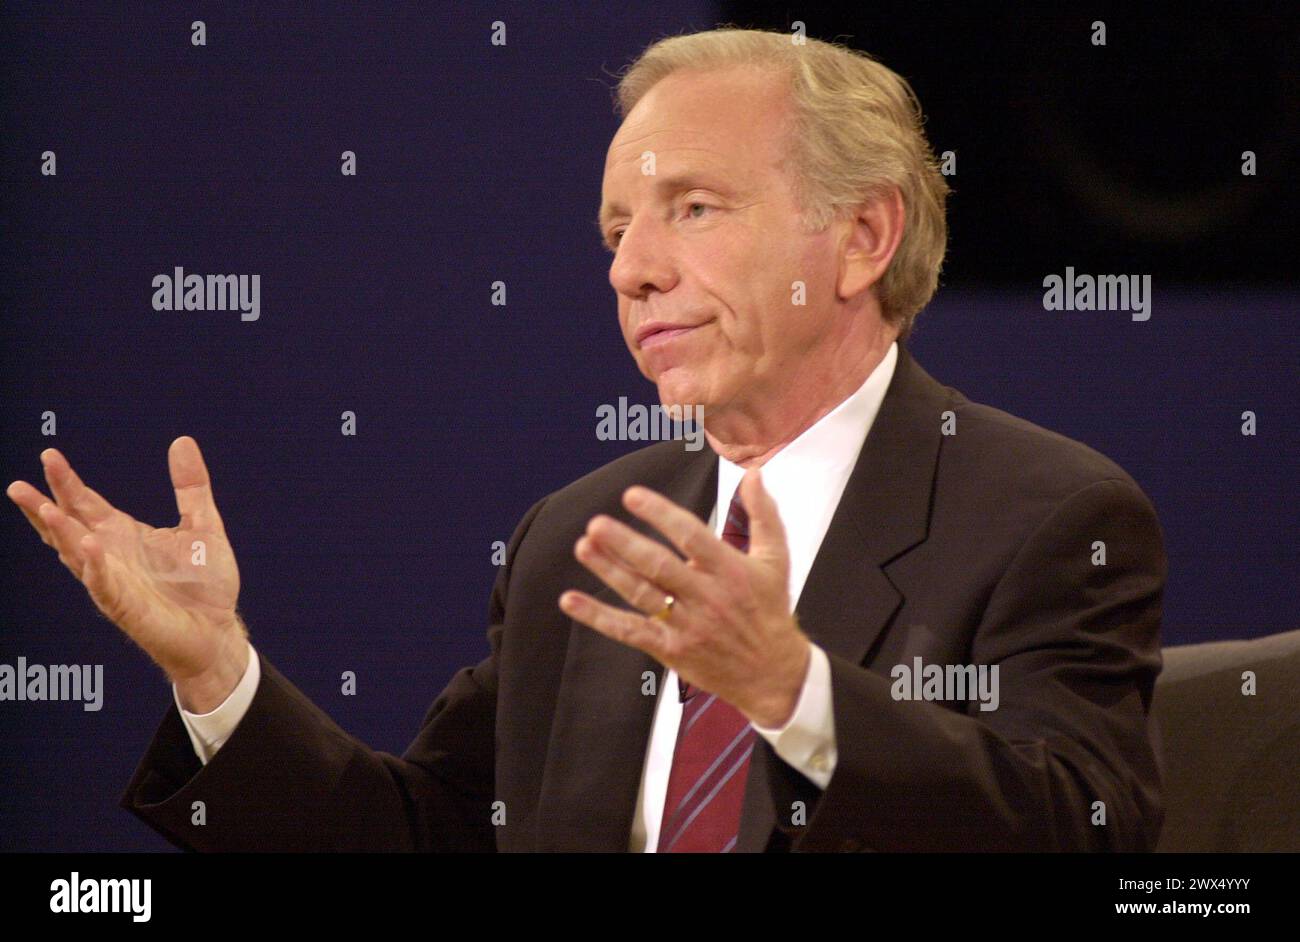 Danville, United States Of America. 05th Oct, 2000. Democratic Vice Presidential Candidate United States Senator Joseph Lieberman (Democrat of Connecticut) pleads his point to the TV cameras during the VP debate at Centre College in Danville, Kentucky against Richard B. Cheney Thursday October 5, 2000. Credit: John Simpson - Pool via CNP/Sipa USA Credit: Sipa USA/Alamy Live News Stock Photo